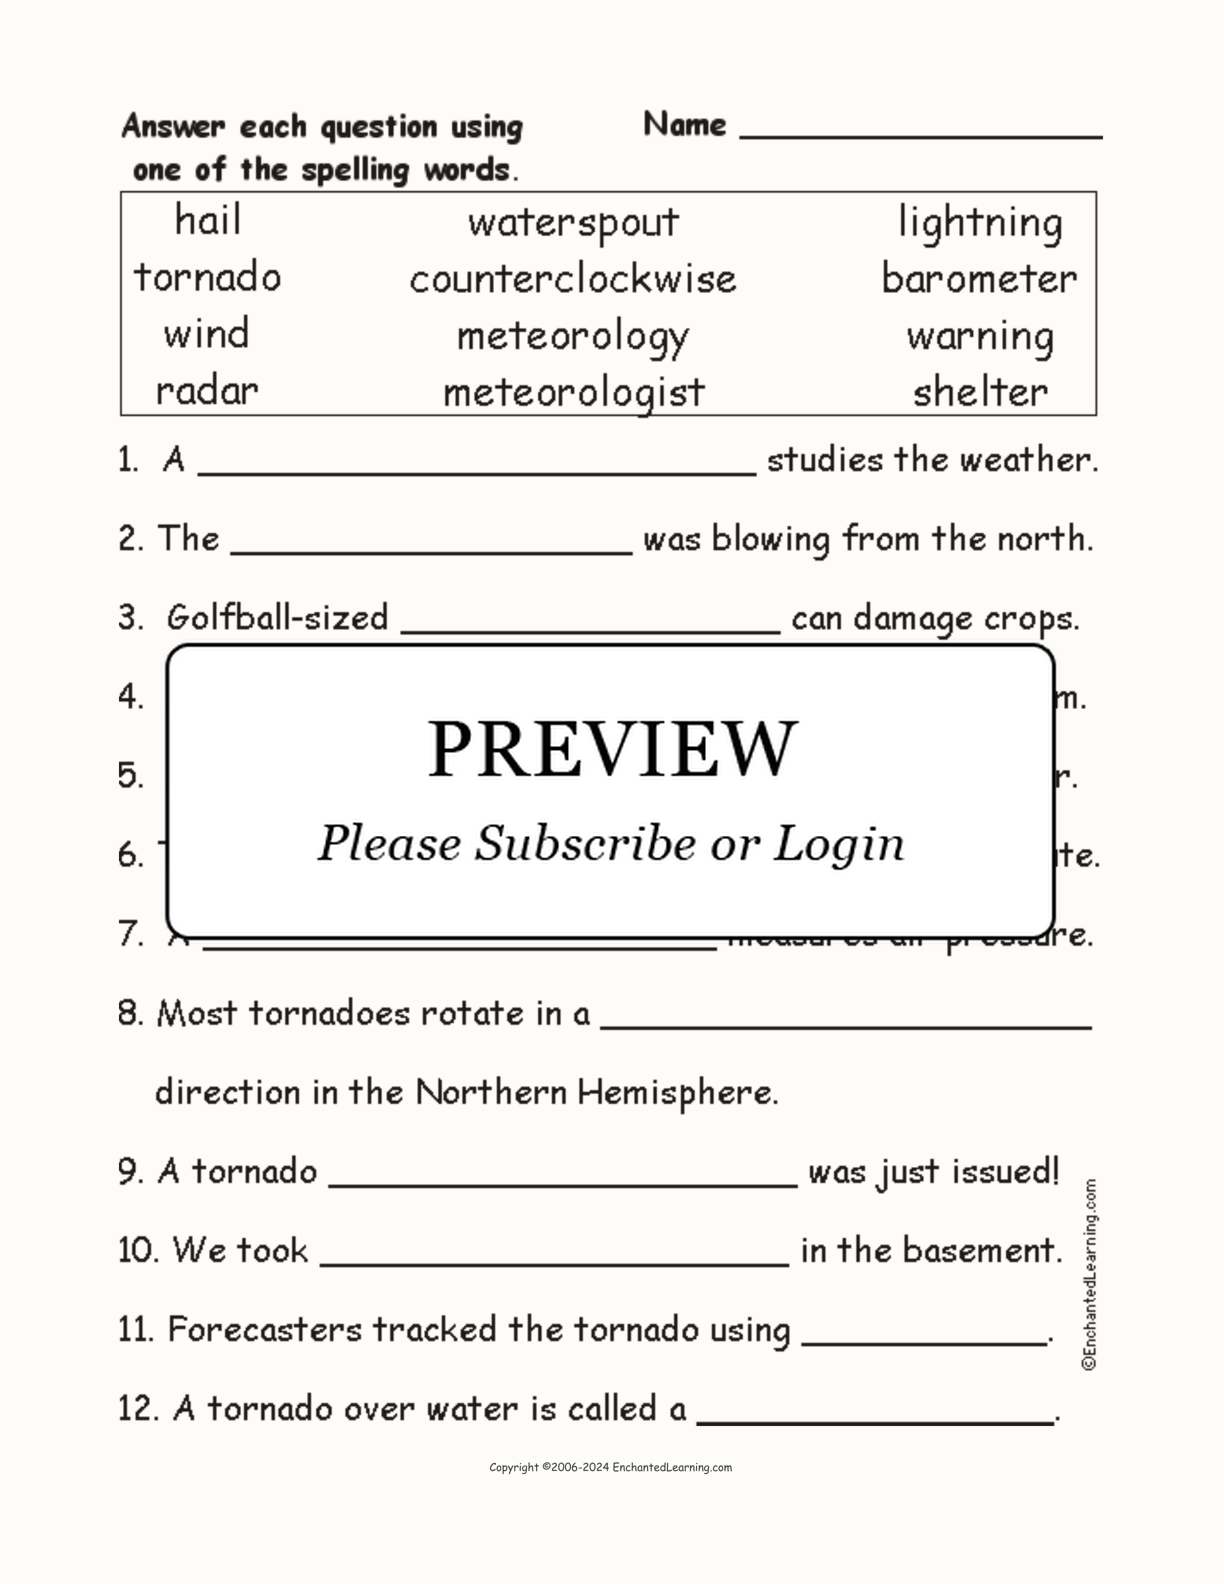 Tornado Spelling Word Questions interactive worksheet page 1